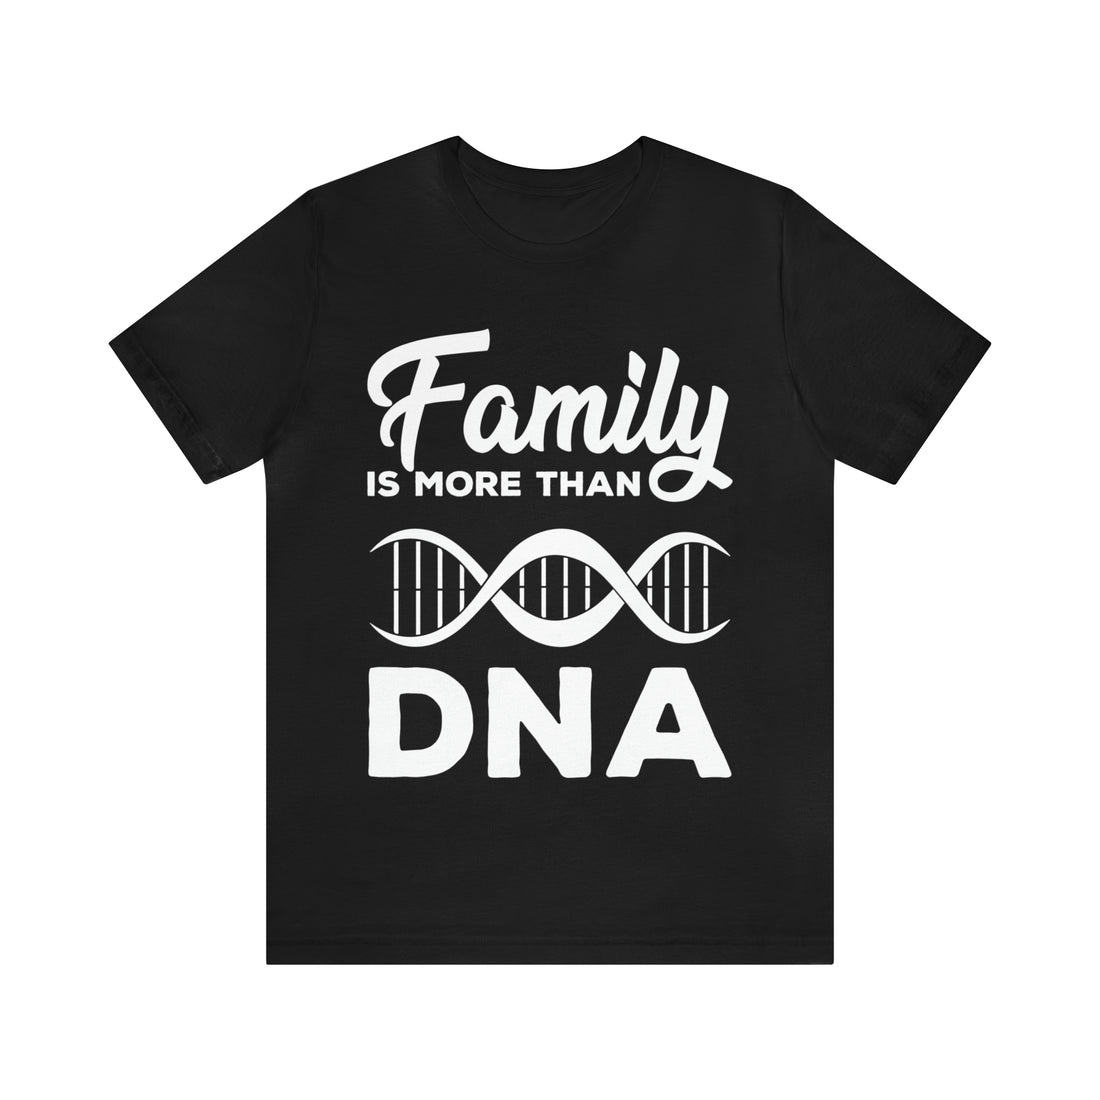 Family is more than DNA - Unisex